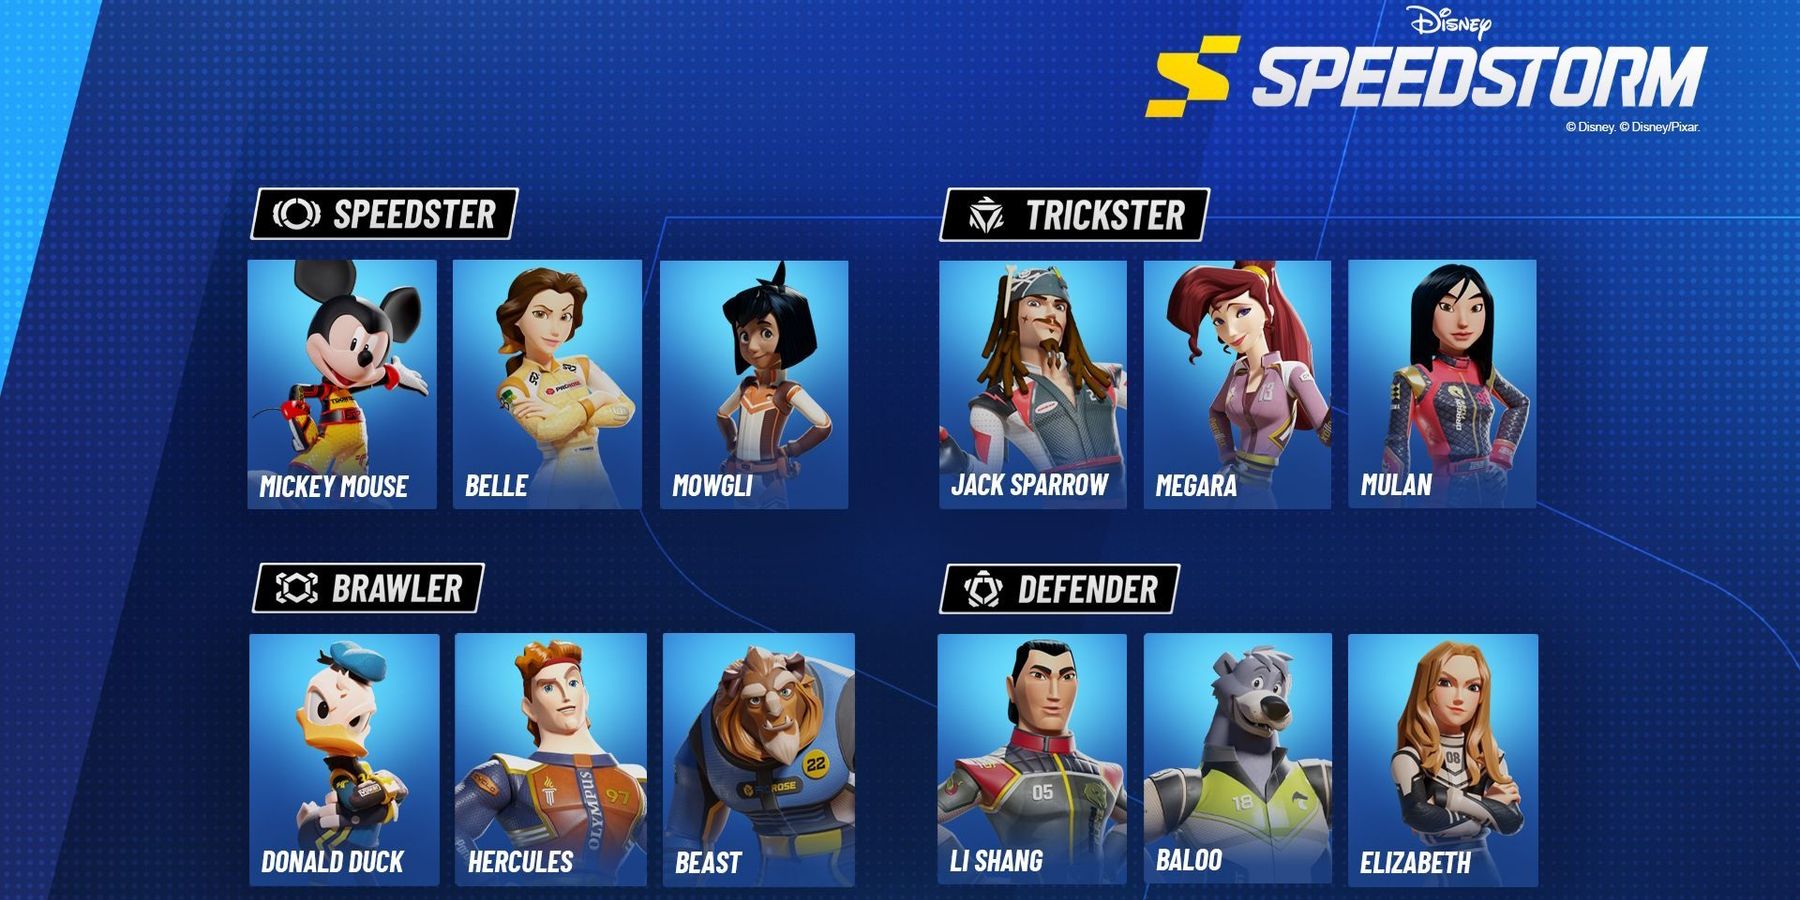 Disney Speedstorm Racers, divided into classes Speedster (with Mickey, Belle, and Mowgli), Trickster (Jack Sparrow, Megara, and Mulan), Brawler (Donald Duck, Hercules, and Beast), and Defender (Li Shang, Baloo, and Elizabeth Swan)